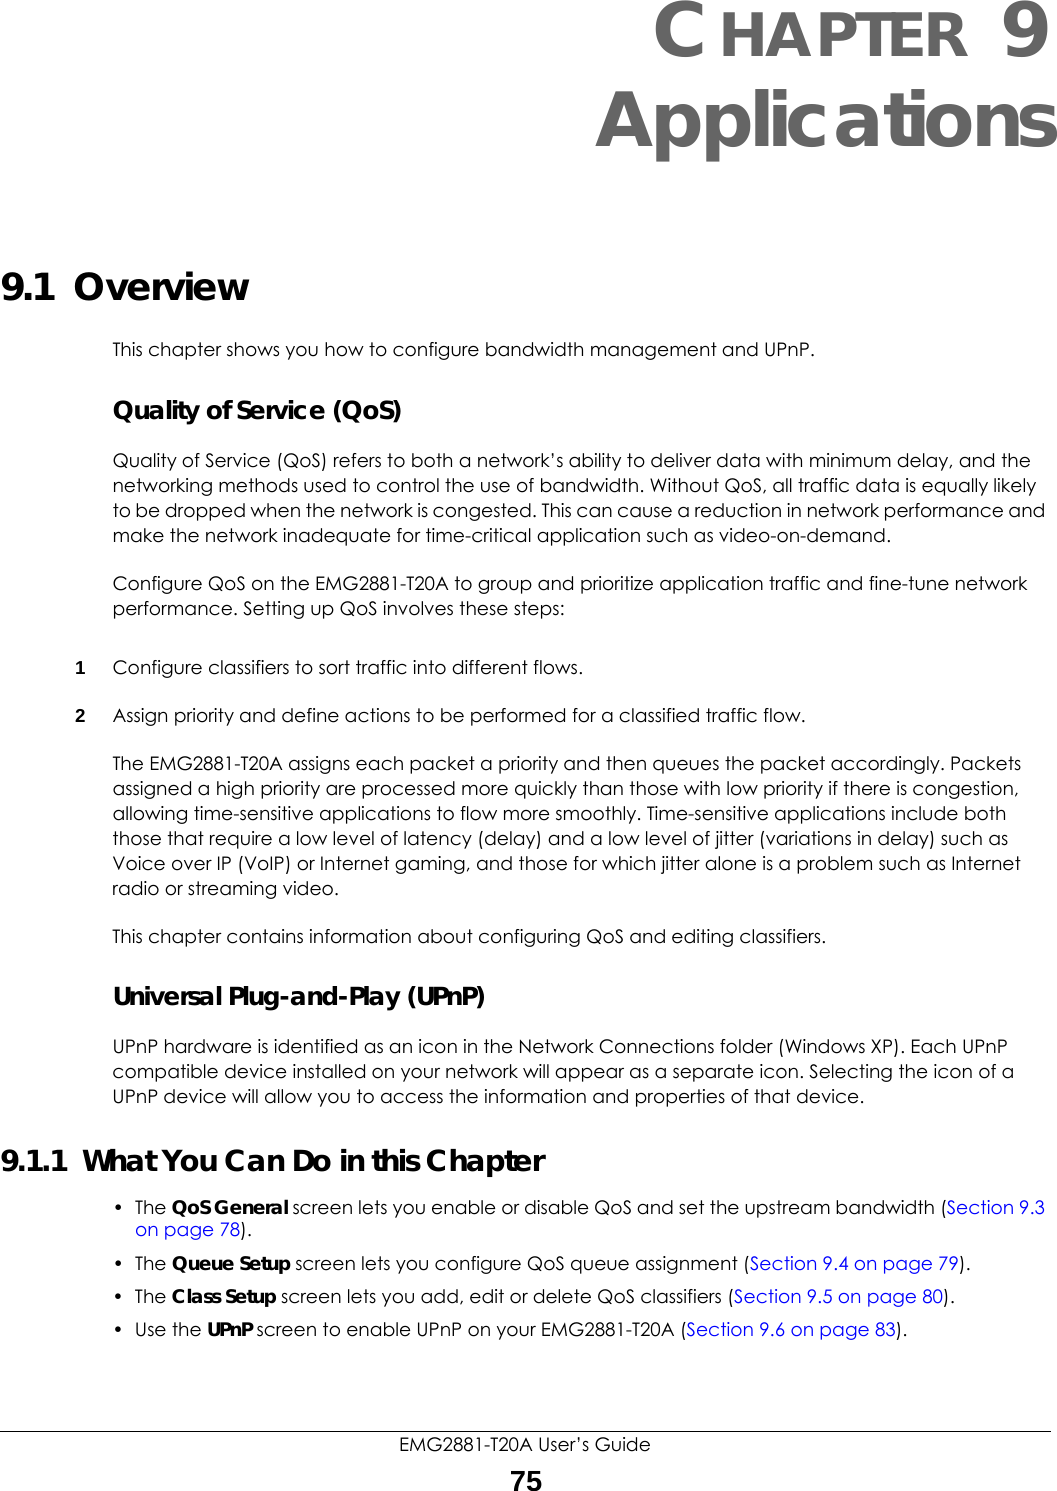 EMG2881-T20A User’s Guide75CHAPTER 9Applications9.1  Overview This chapter shows you how to configure bandwidth management and UPnP.Quality of Service (QoS)Quality of Service (QoS) refers to both a network’s ability to deliver data with minimum delay, and the networking methods used to control the use of bandwidth. Without QoS, all traffic data is equally likely to be dropped when the network is congested. This can cause a reduction in network performance and make the network inadequate for time-critical application such as video-on-demand.Configure QoS on the EMG2881-T20A to group and prioritize application traffic and fine-tune network performance. Setting up QoS involves these steps:1Configure classifiers to sort traffic into different flows. 2Assign priority and define actions to be performed for a classified traffic flow. The EMG2881-T20A assigns each packet a priority and then queues the packet accordingly. Packets assigned a high priority are processed more quickly than those with low priority if there is congestion, allowing time-sensitive applications to flow more smoothly. Time-sensitive applications include both those that require a low level of latency (delay) and a low level of jitter (variations in delay) such as Voice over IP (VoIP) or Internet gaming, and those for which jitter alone is a problem such as Internet radio or streaming video.This chapter contains information about configuring QoS and editing classifiers.Universal Plug-and-Play (UPnP)UPnP hardware is identified as an icon in the Network Connections folder (Windows XP). Each UPnP compatible device installed on your network will appear as a separate icon. Selecting the icon of a UPnP device will allow you to access the information and properties of that device. 9.1.1  What You Can Do in this Chapter• The QoS General screen lets you enable or disable QoS and set the upstream bandwidth (Section 9.3 on page 78).• The Queue Setup screen lets you configure QoS queue assignment (Section 9.4 on page 79).• The Class Setup screen lets you add, edit or delete QoS classifiers (Section 9.5 on page 80).• Use the UPnP screen to enable UPnP on your EMG2881-T20A (Section 9.6 on page 83).